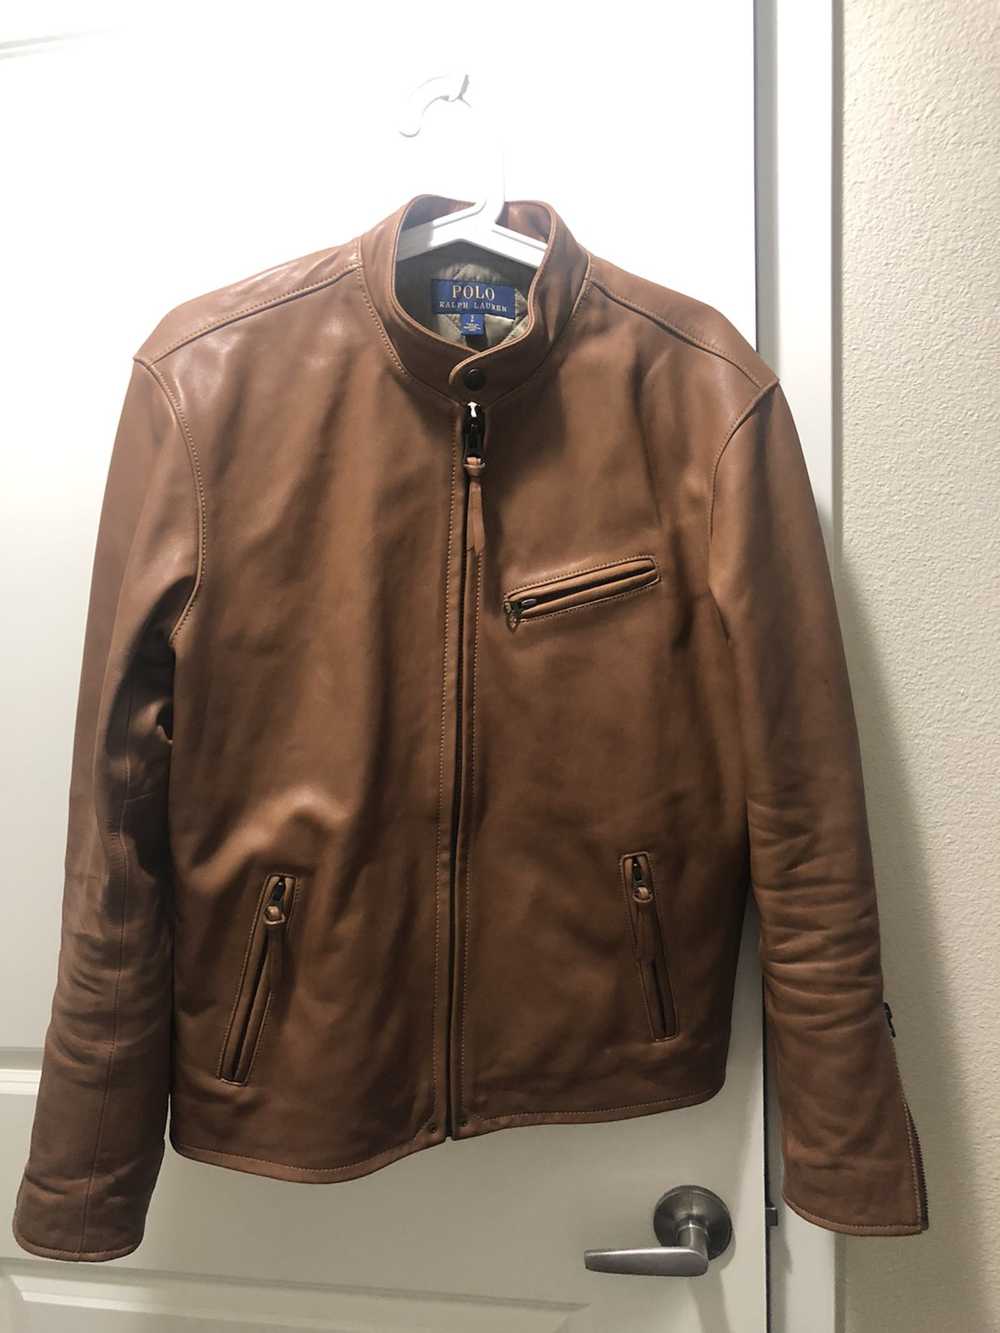 Polo Ralph Lauren 1/1 Polo Leather Jacket tailore… - image 3